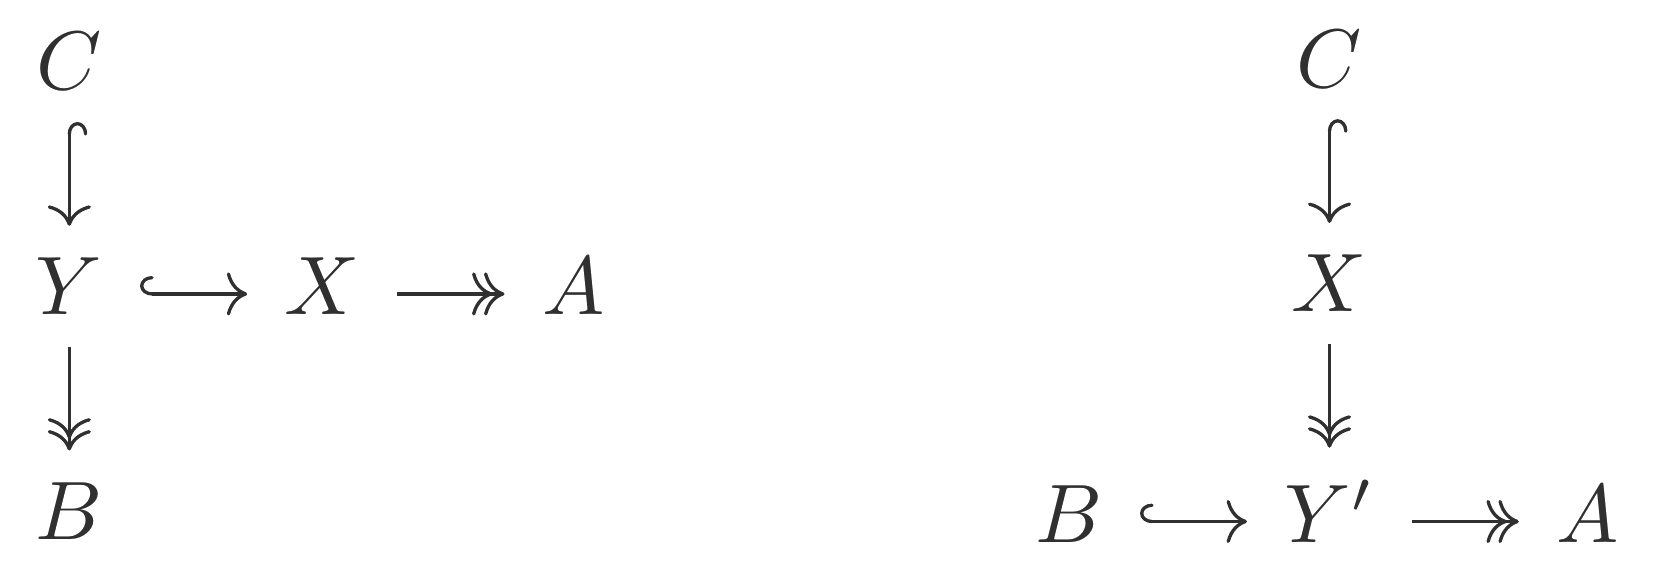 Image of diagrams of the filtration and cofiltration suggested by the last equation.